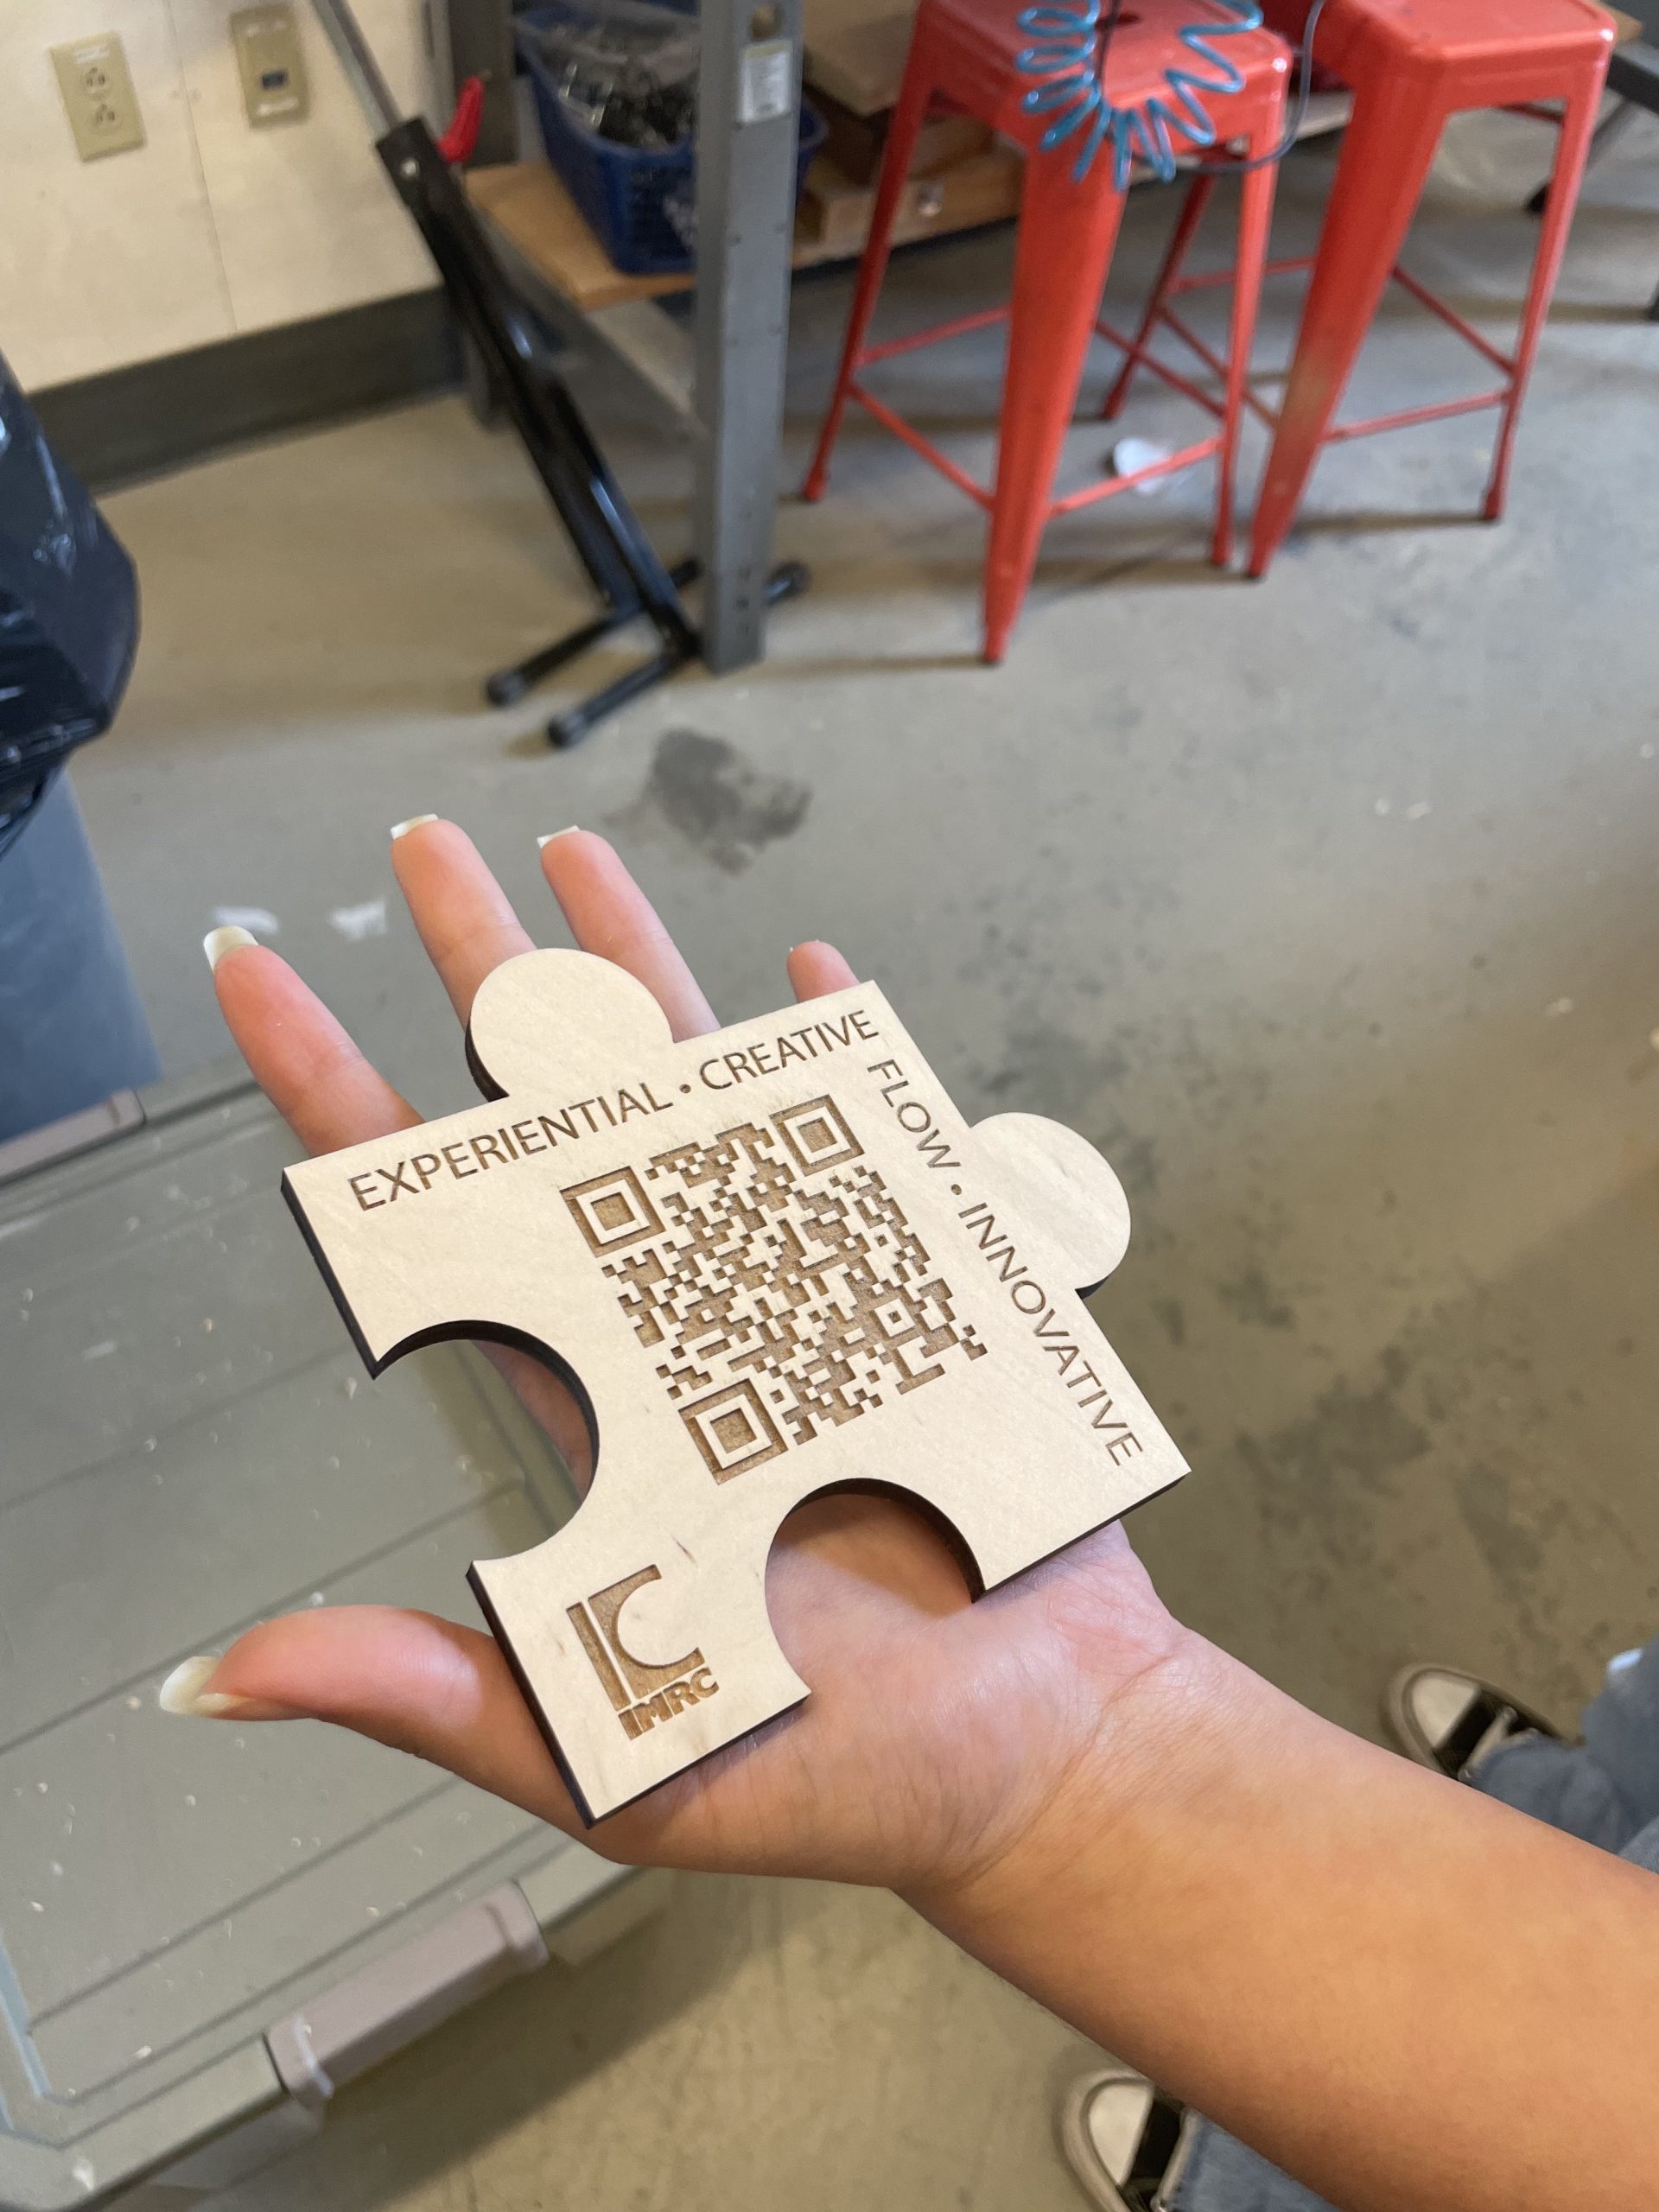 QR Code for IMRC Center and IMRC Center logo cut into wood puzzle pieces by the IMRC Center Universal Laser